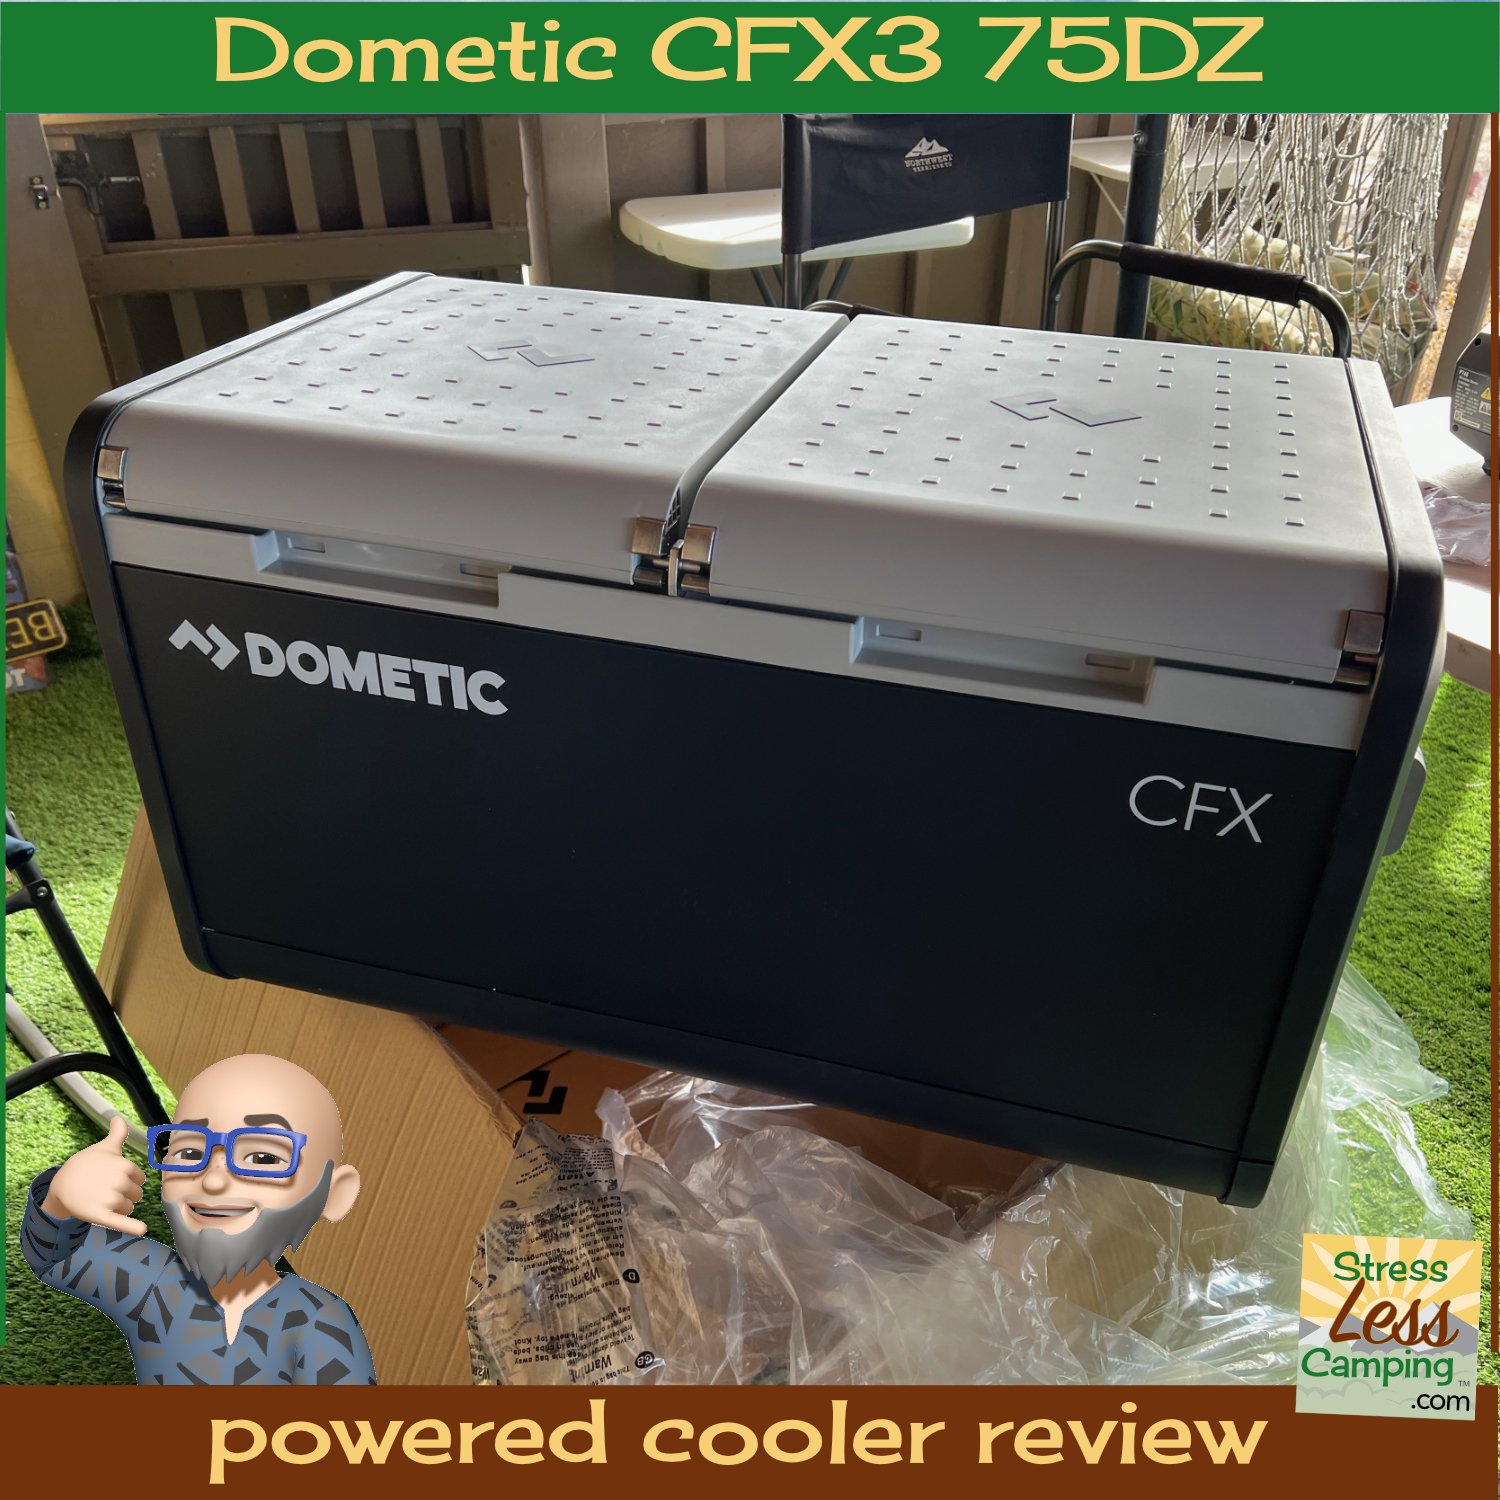 Full review of the Dometic CFX3 75DZ powered cooler